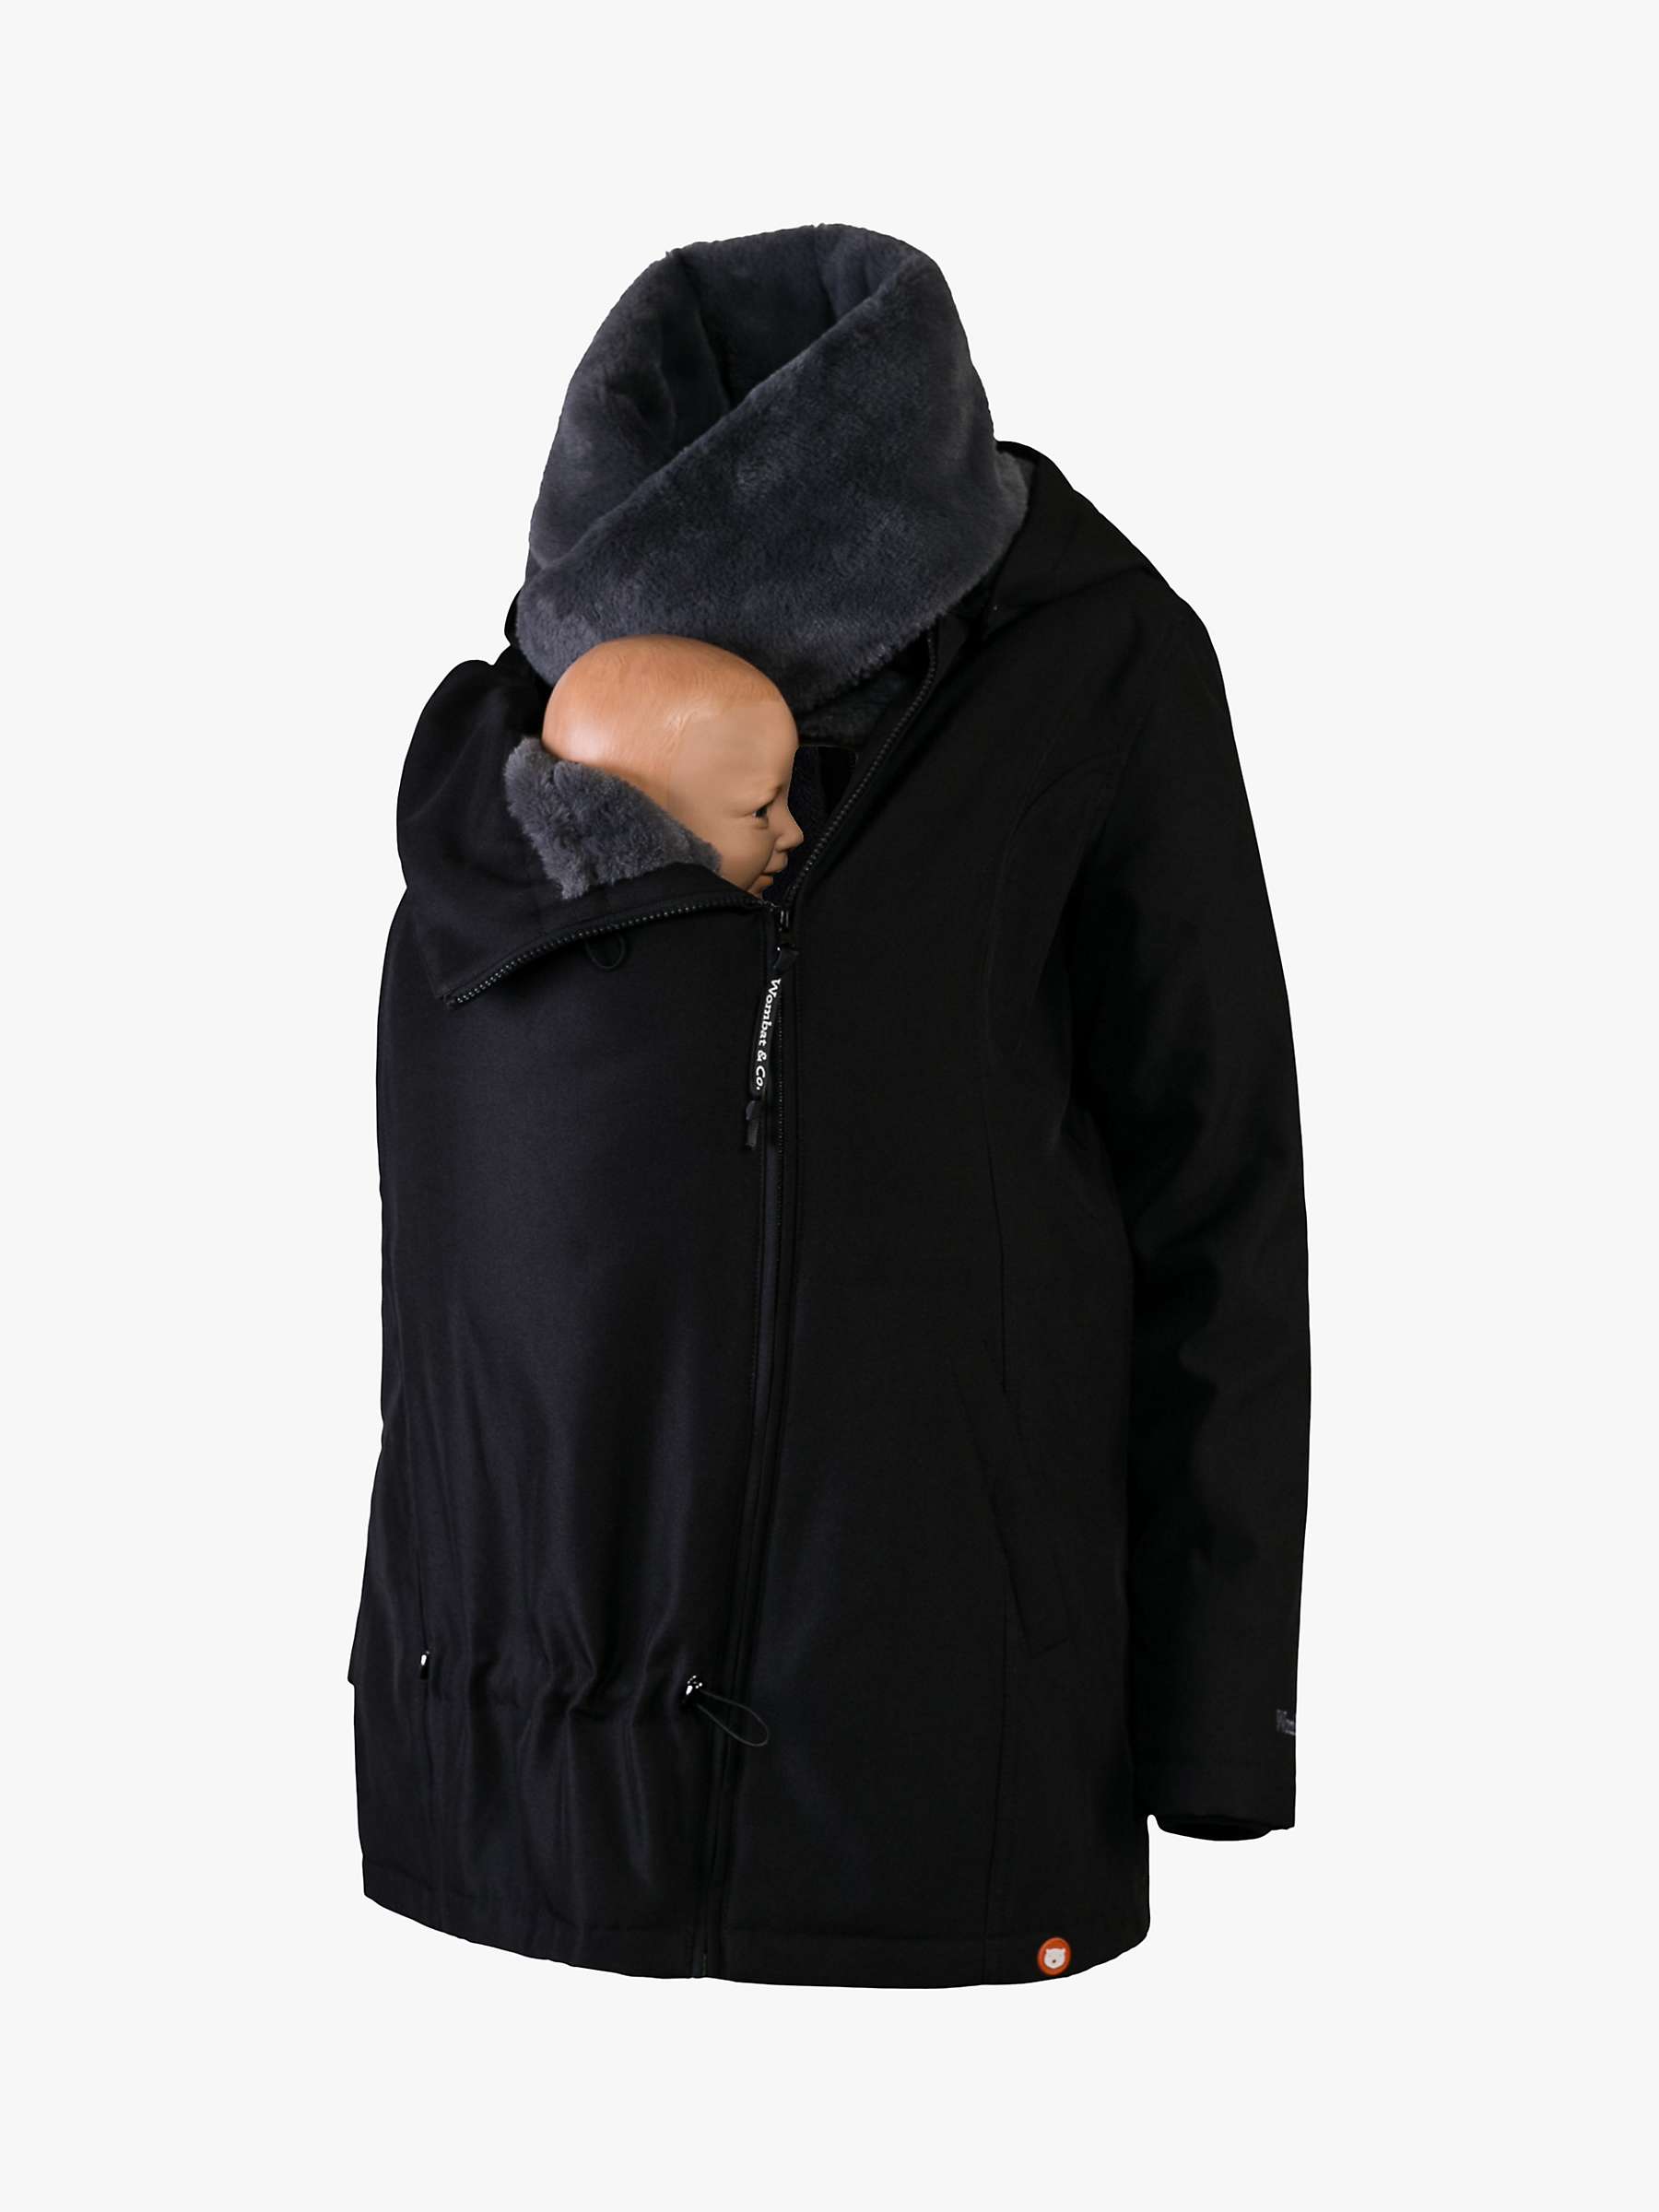 Buy Wombat & Co Wallaby Baby Wearing Maternity Coat Online at johnlewis.com